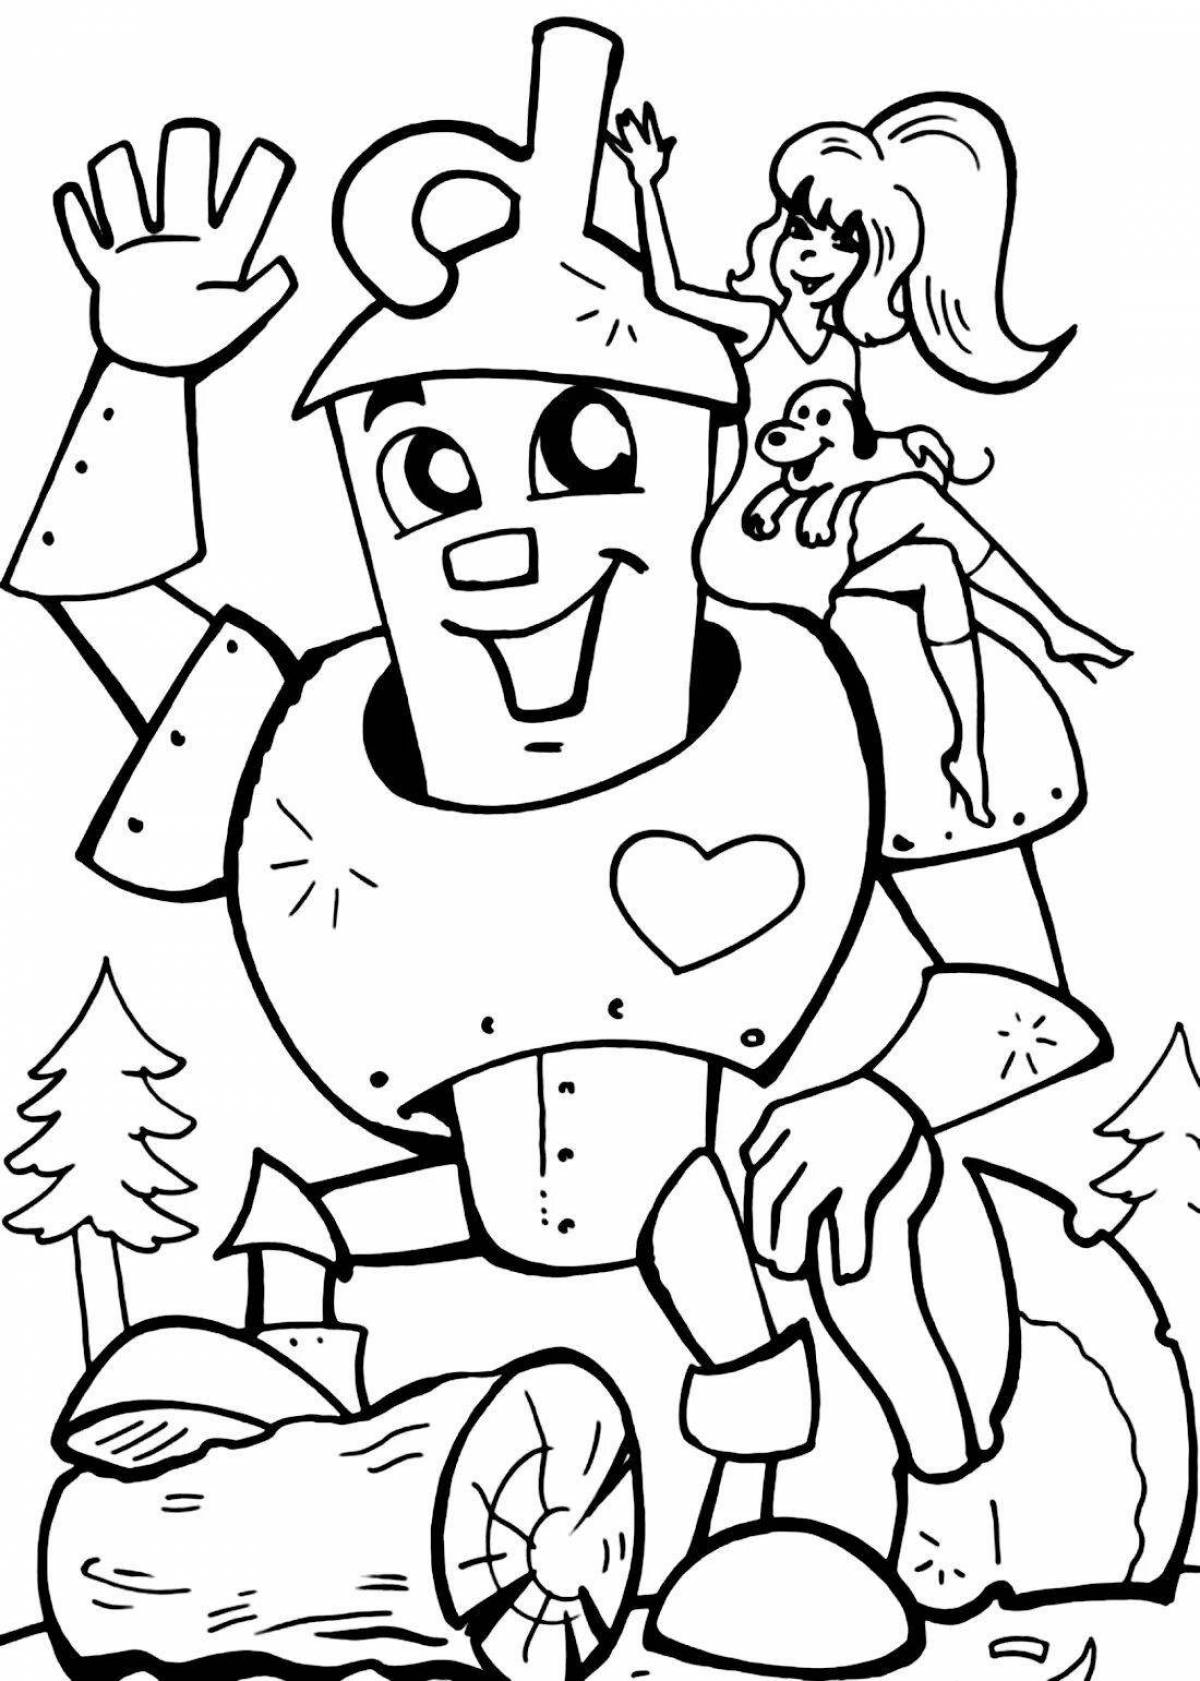 Live woodcutter coloring page